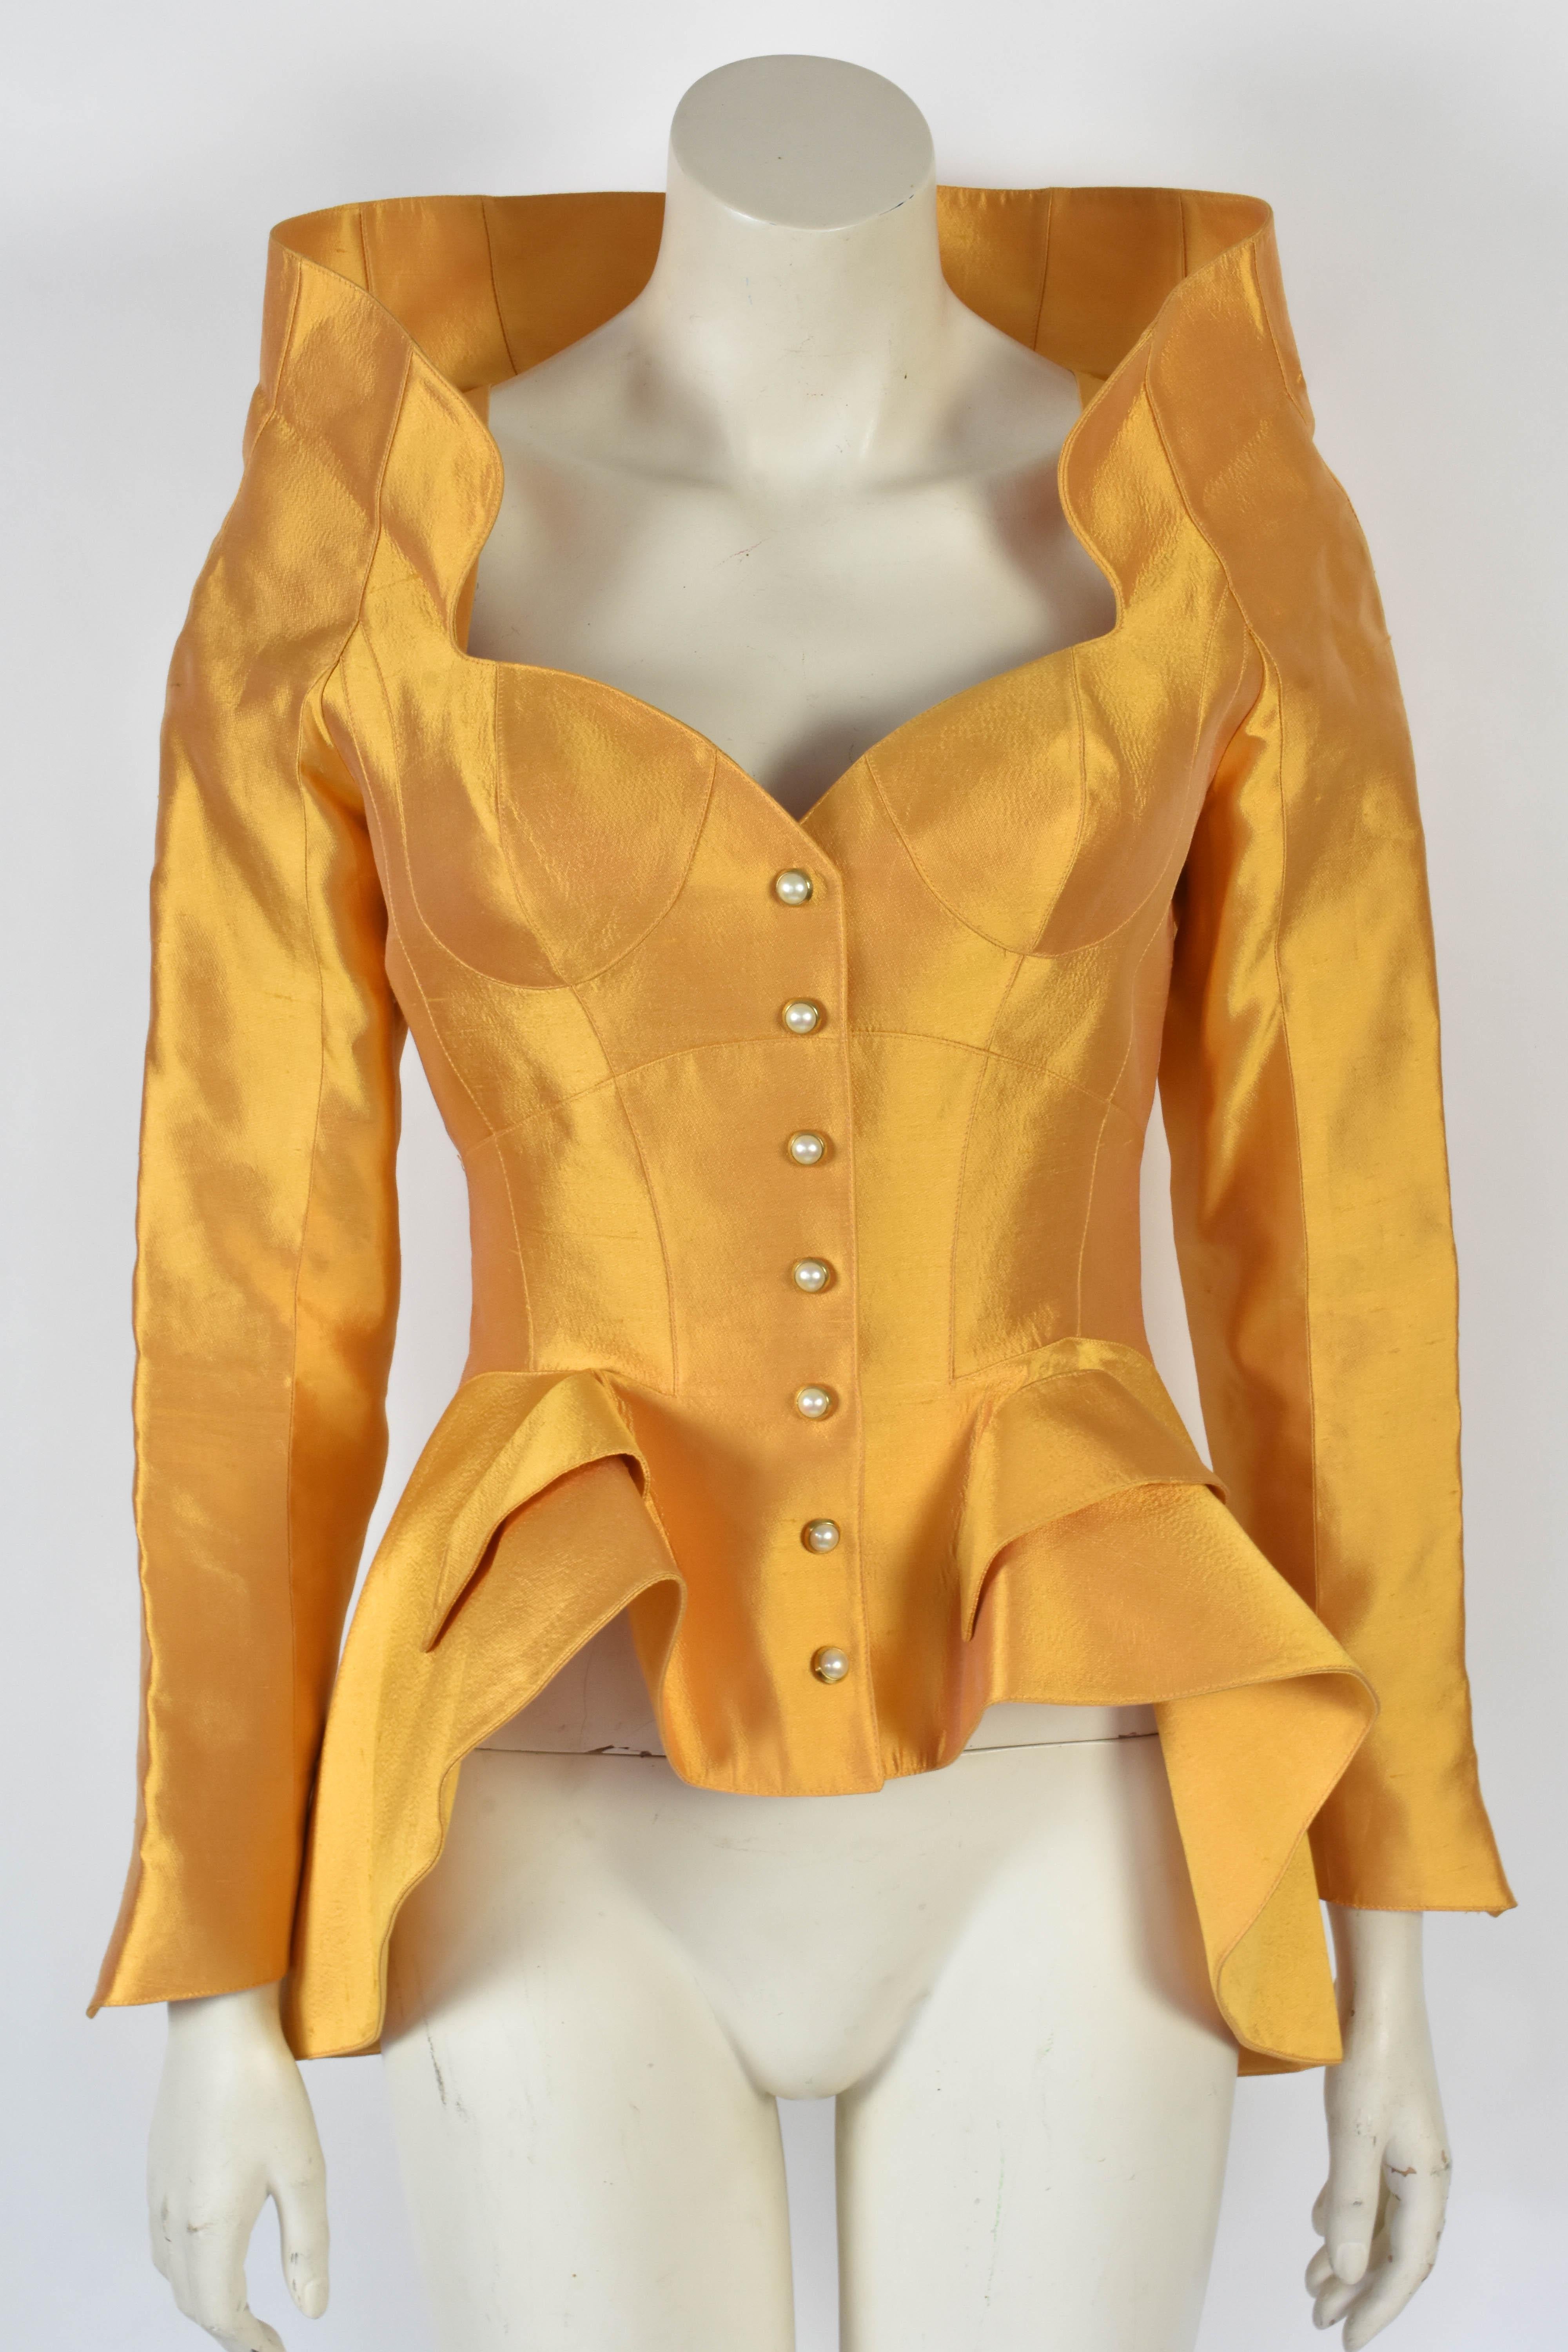 Thierry Mugler Haute Couture 1995 Cirque d'Hiver Gold Jacket worn By Kate Moss 1